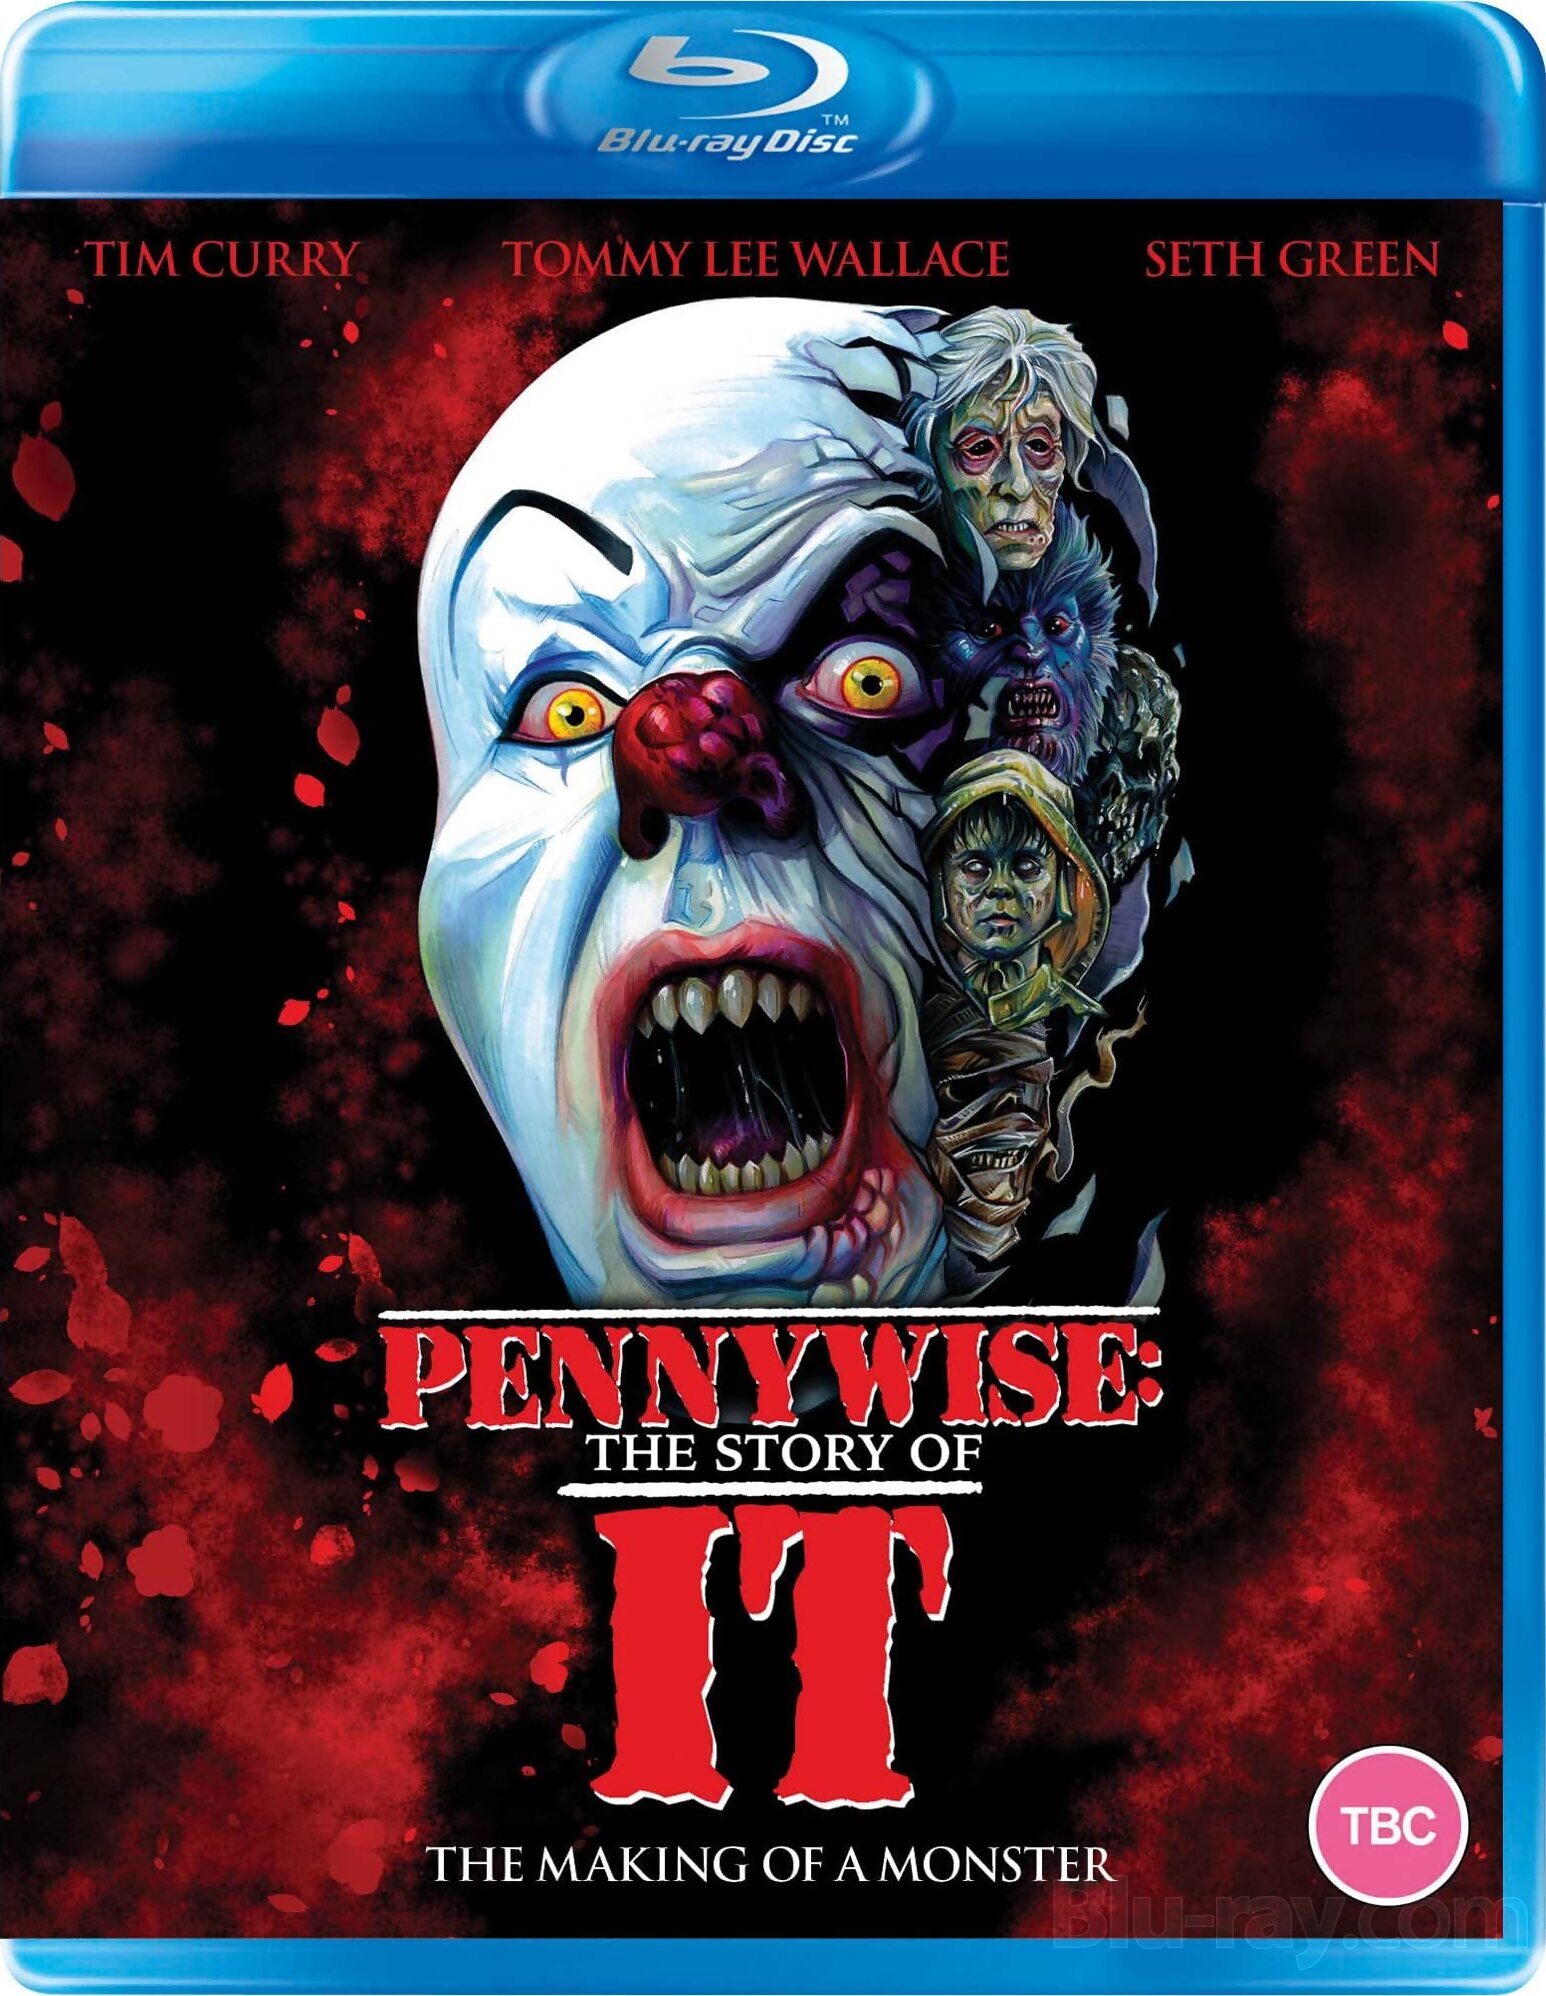 Pennywise: The Story of IT.